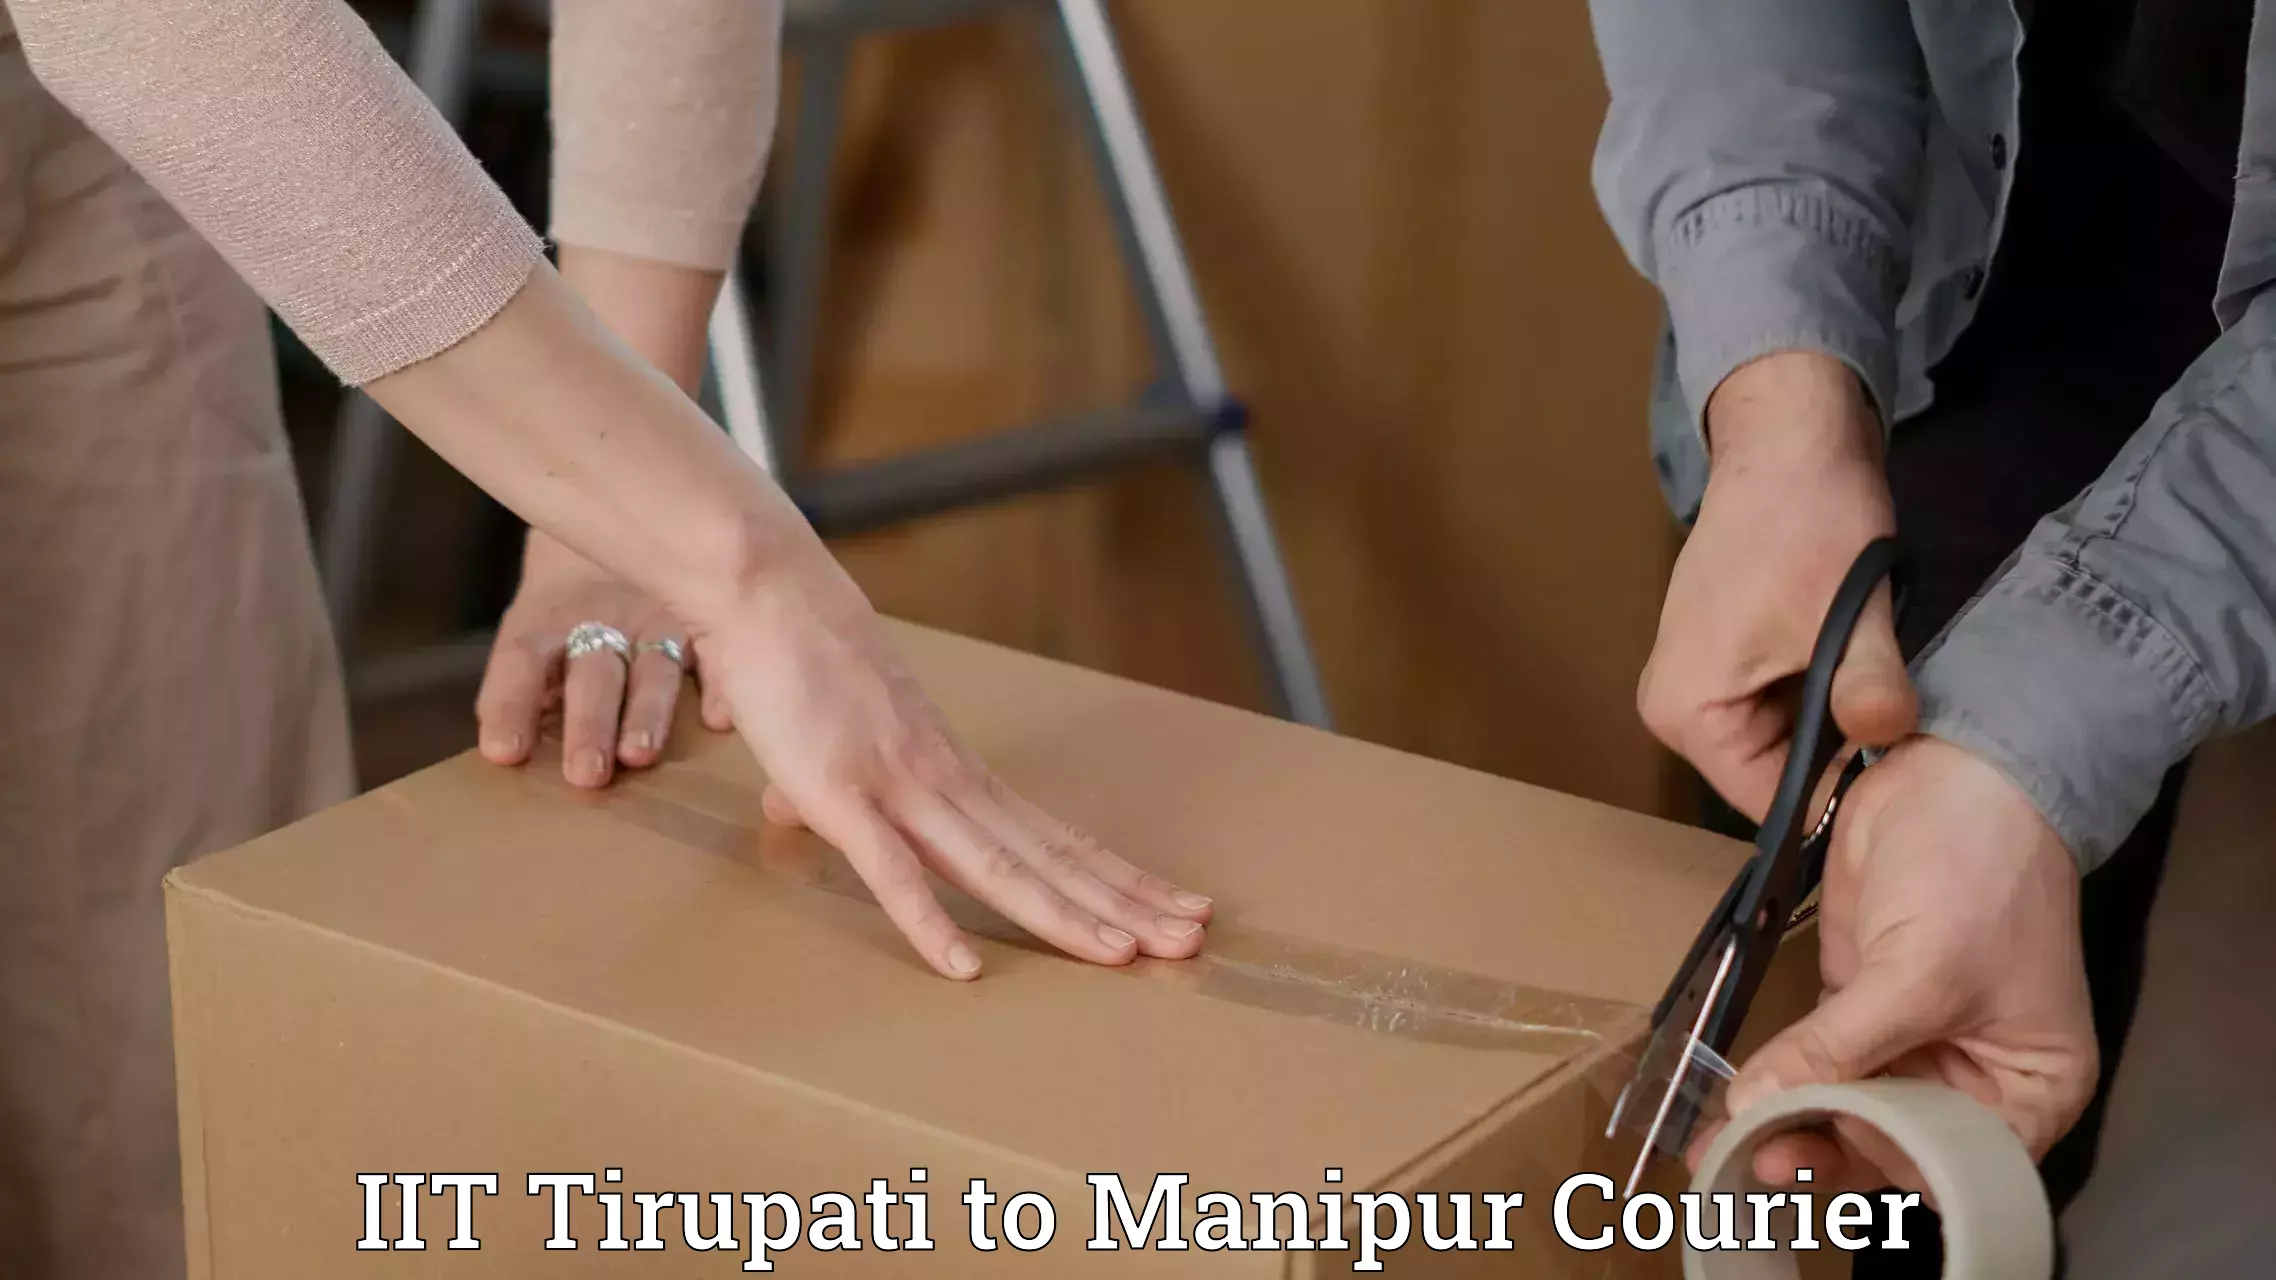 Cash on delivery service IIT Tirupati to Manipur